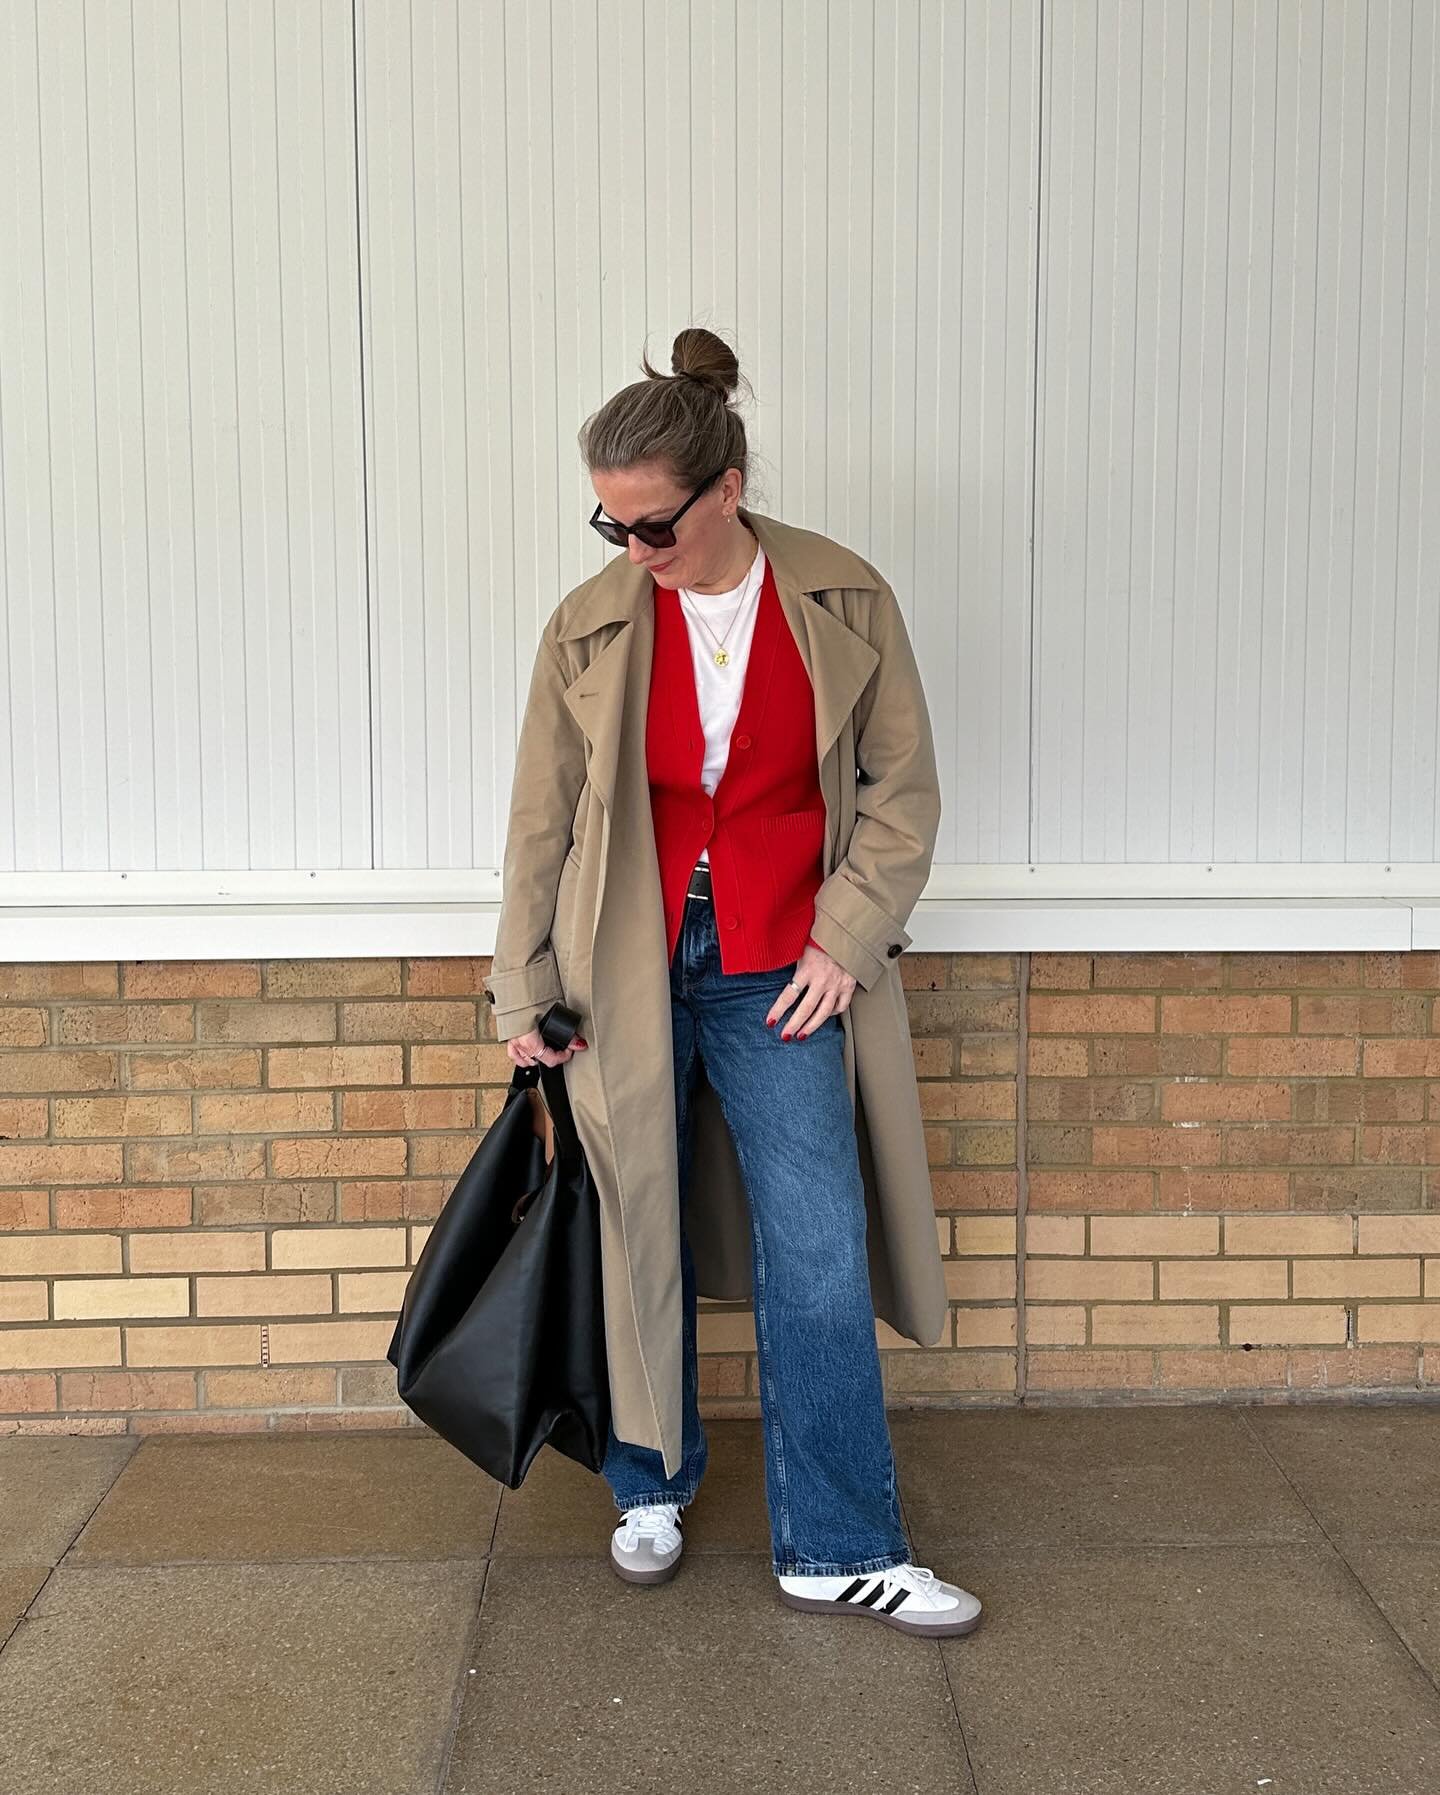 Red, white and blue... who knew? With the beige of the trench, this is a colour combo I feel surprisingly at home in... and the @arketofficial cardigan is a surefire winner. Knew from the minute I spotted it on @francescasaffari it was one to add to 